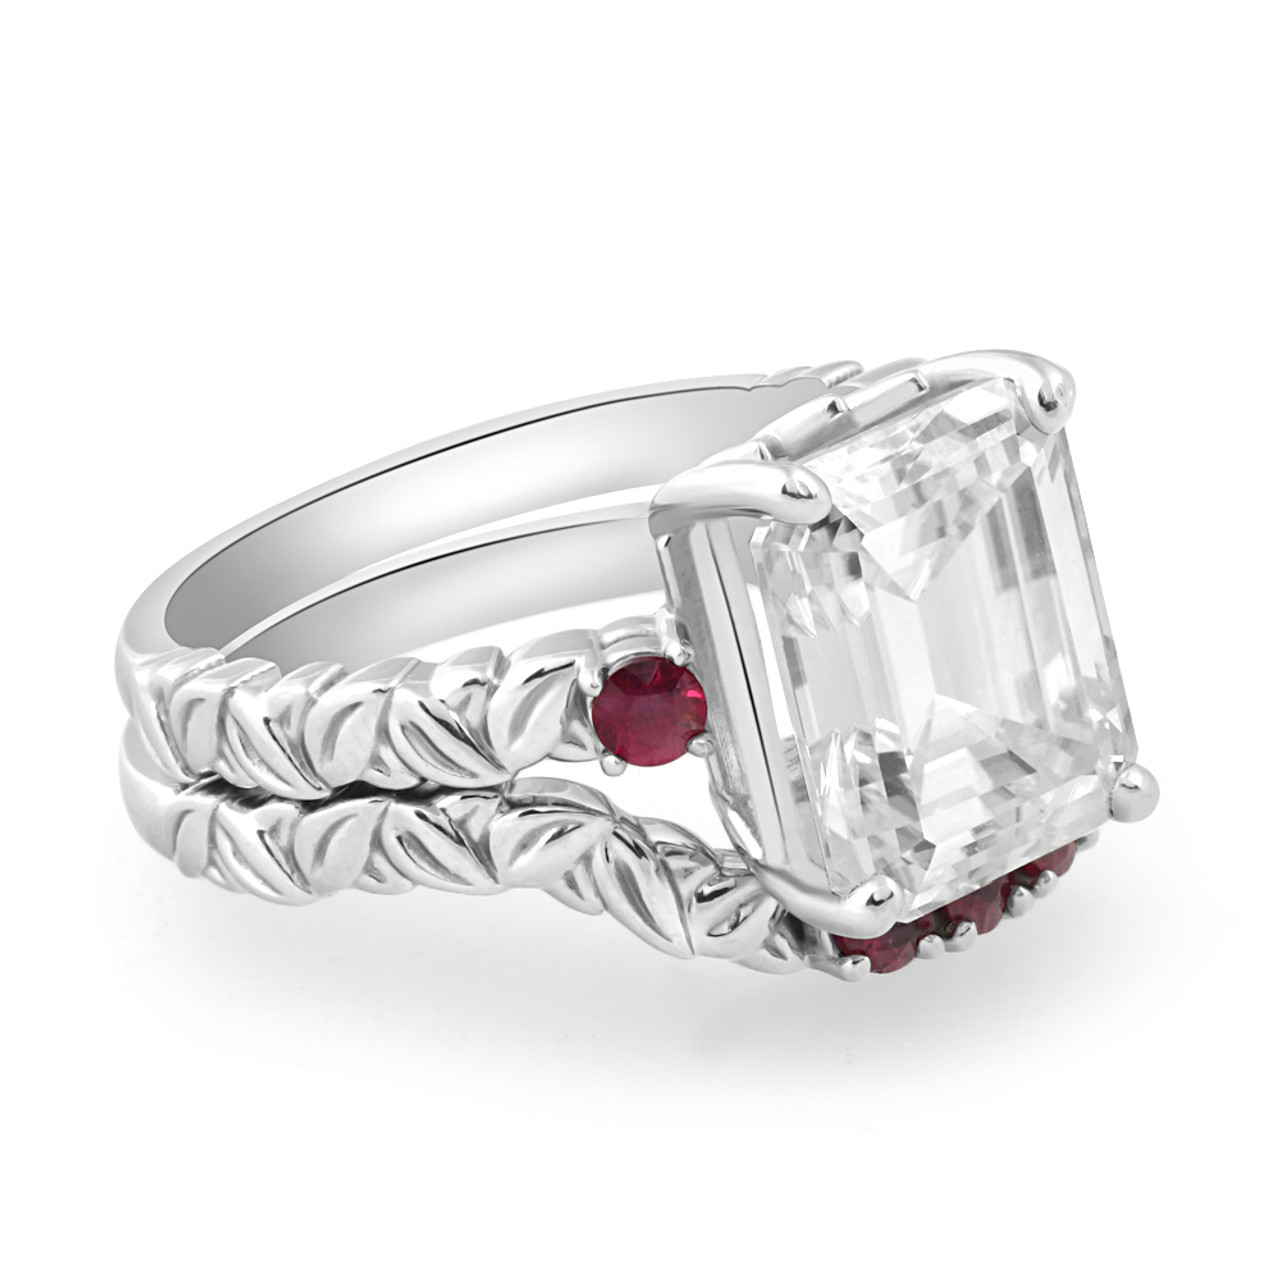 5 1/2Ct Ruby & Emerald Cut Moissanite Petite Leaf Engagement Set in Gold